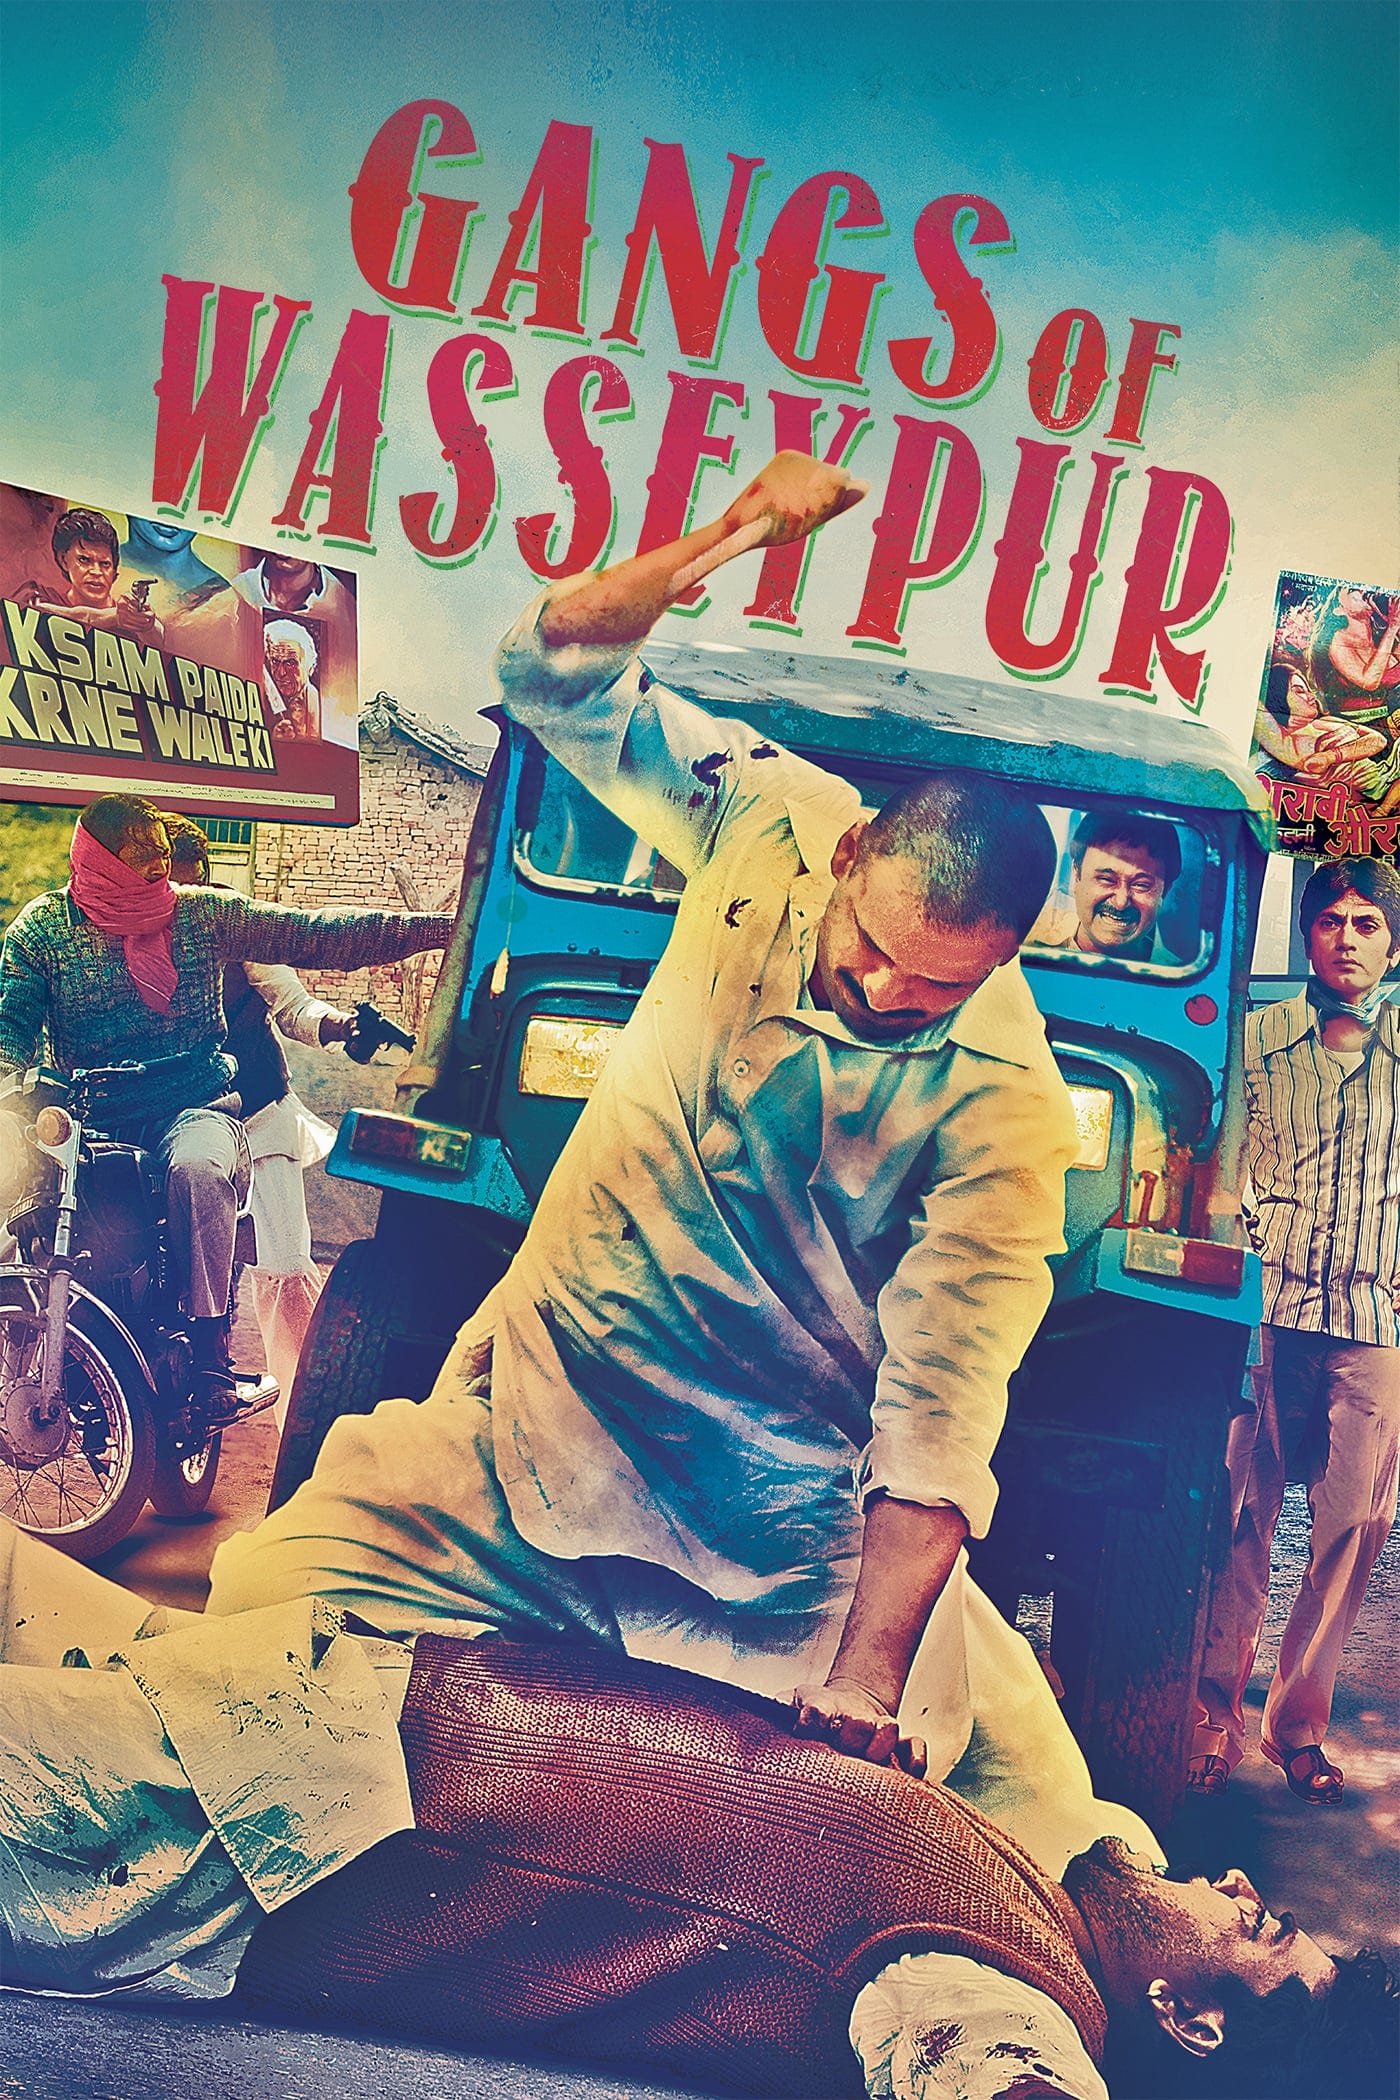 Poster for the movie "Gangs of Wasseypur - Part 1"